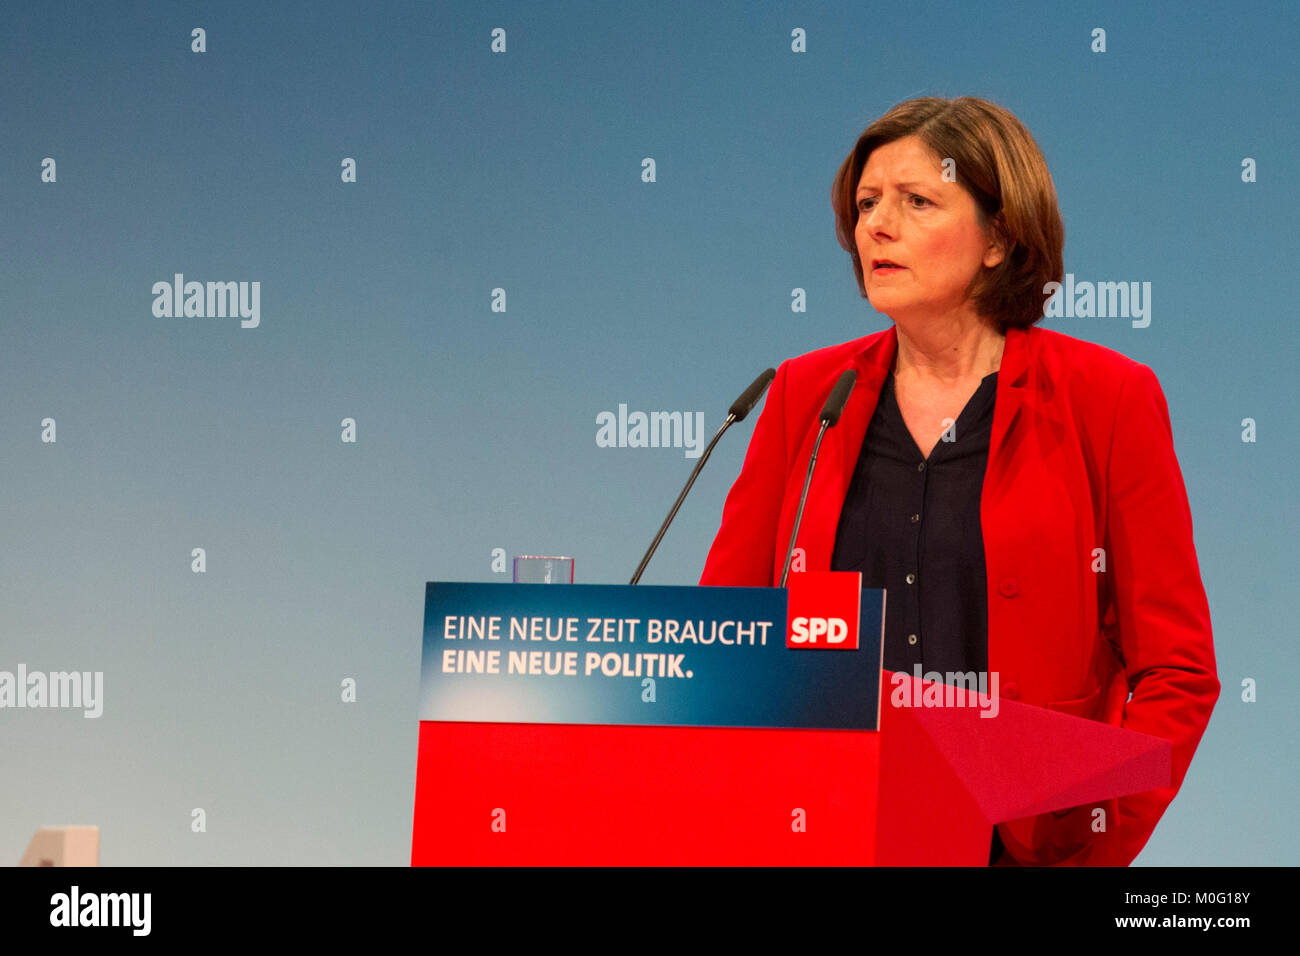 Bonn, Germany. 21 January 2018. Malu Dreyer, Prime Minister of Rhineland-Palatinate. SPD extraordinary party convention at World Conference Center Bonn to discuss and approve options to enter into a grand coalition with the CDU, Christian Democrats, before asking SPD members for approval. Stock Photo